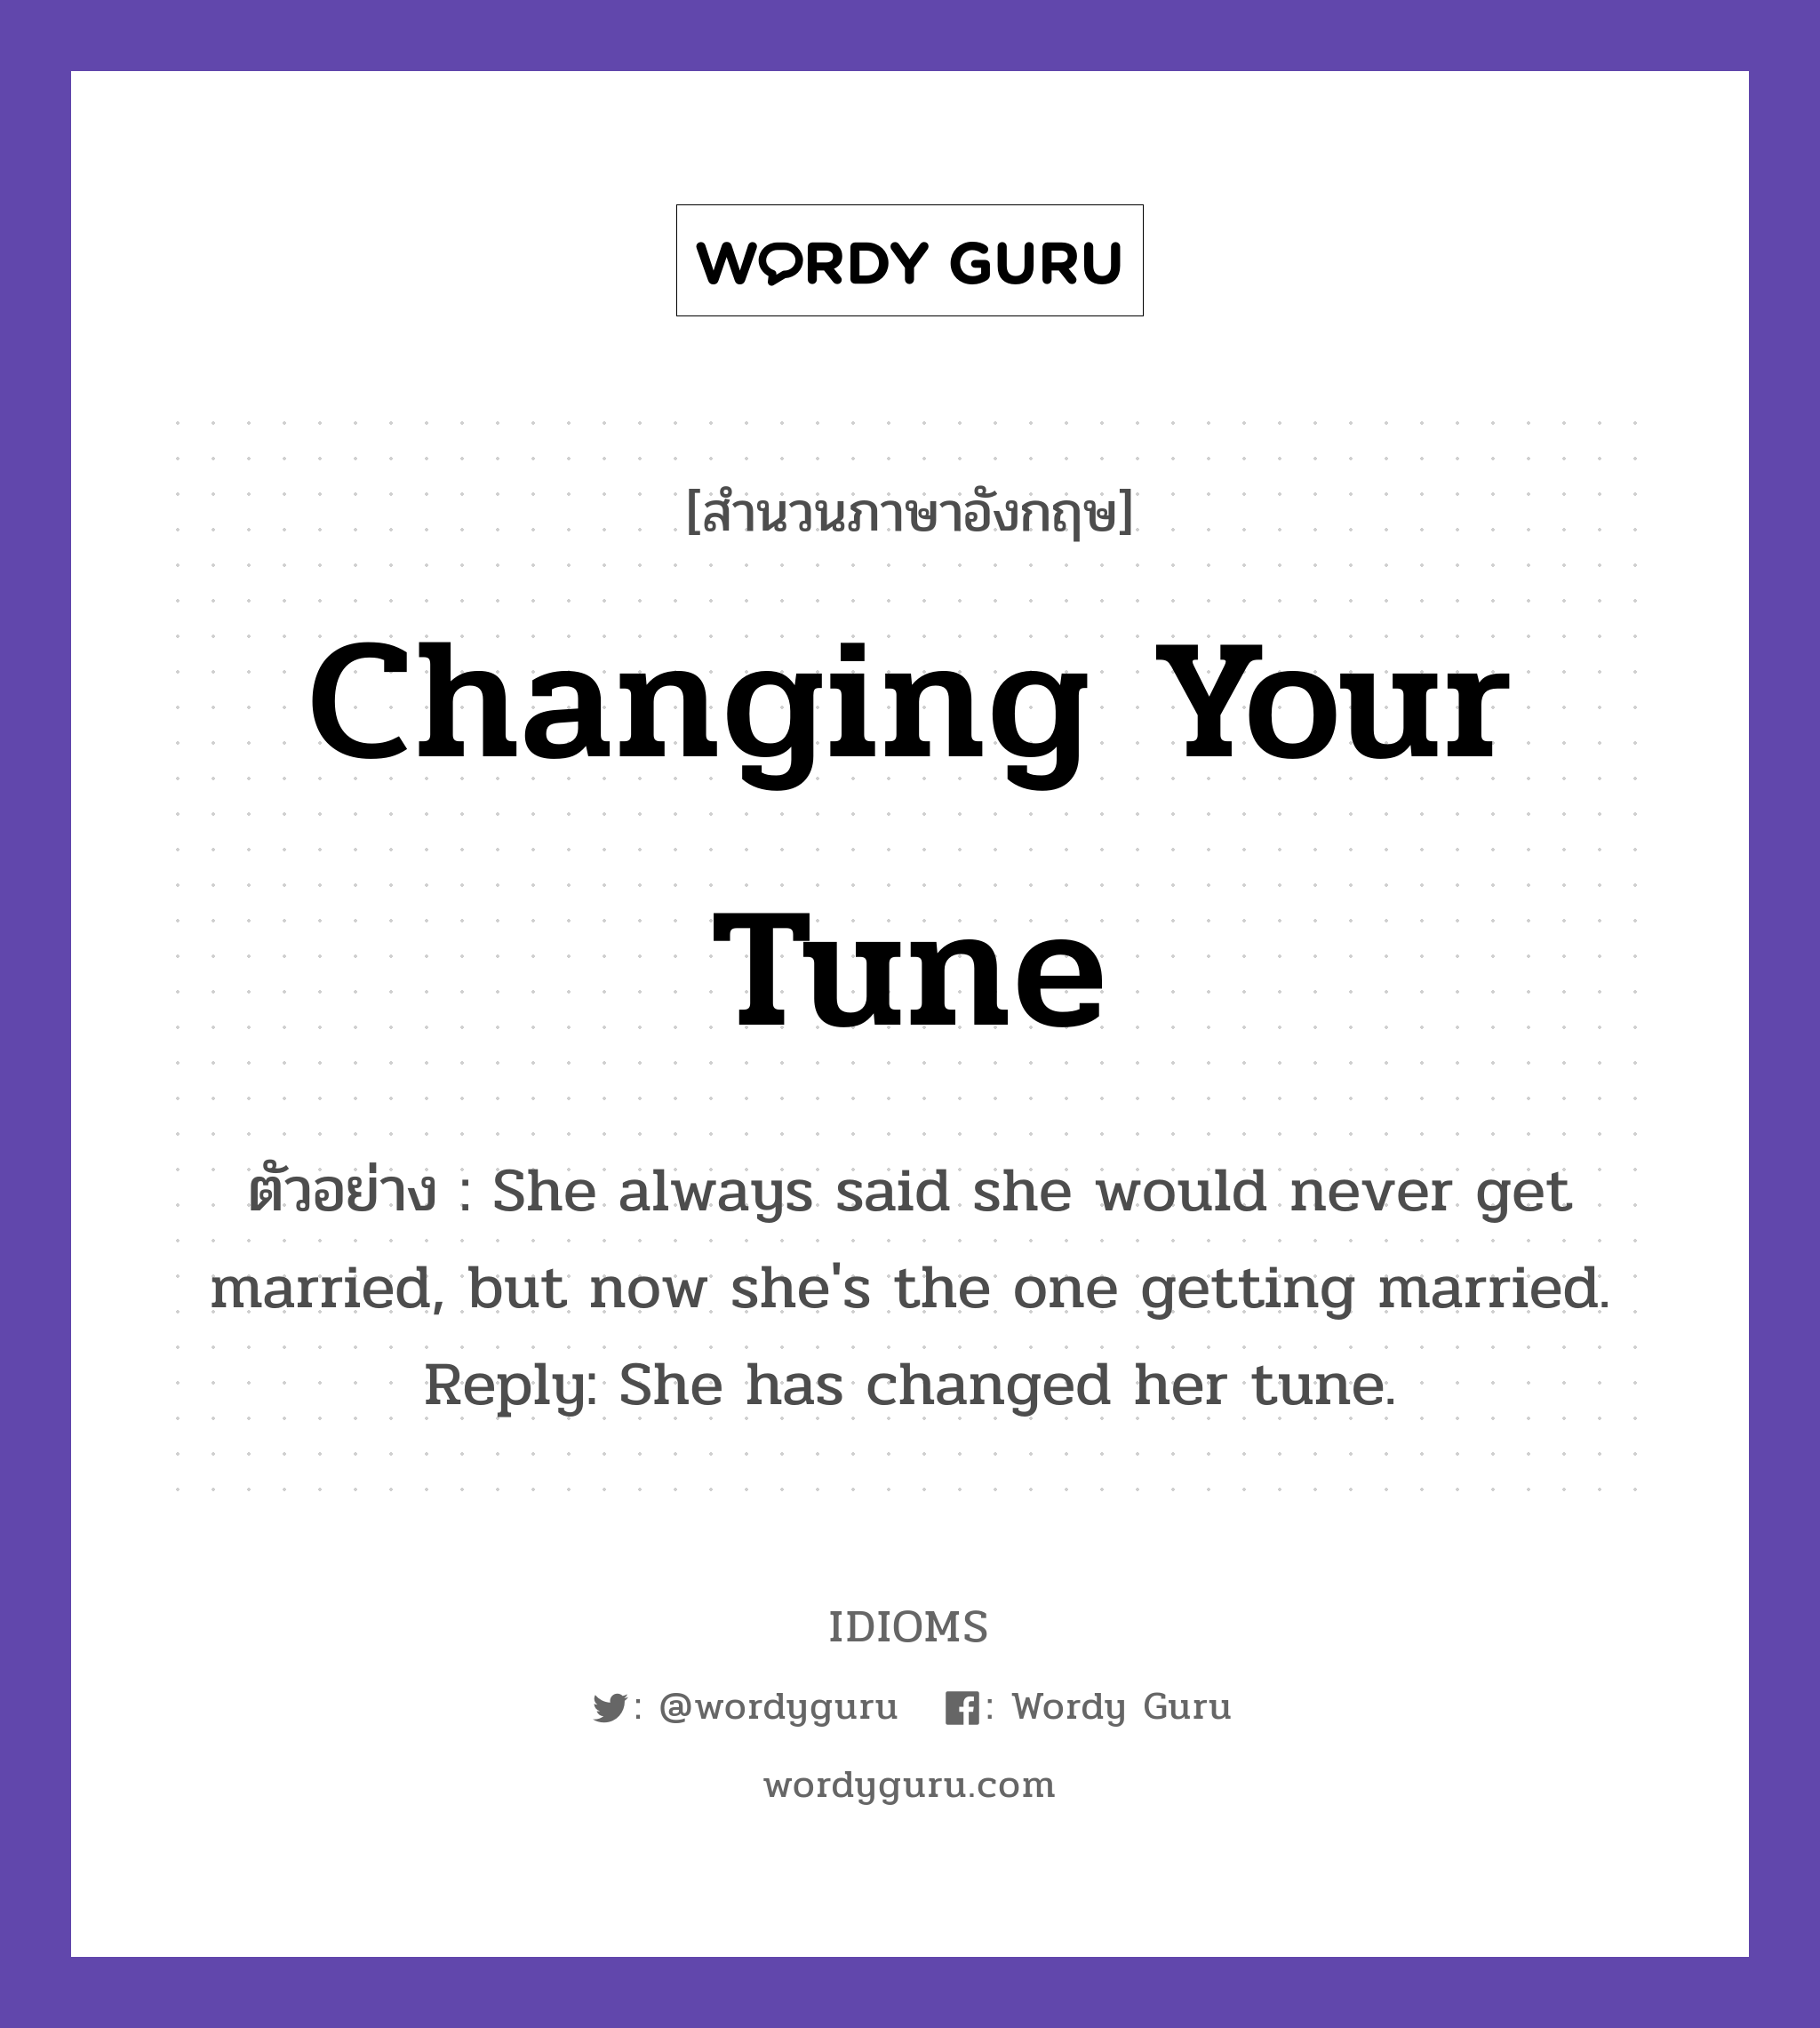 Changing Your Tune แปลว่า?, สำนวนภาษาอังกฤษ Changing Your Tune ตัวอย่าง She always said she would never get married, but now she's the one getting married. Reply: She has changed her tune.